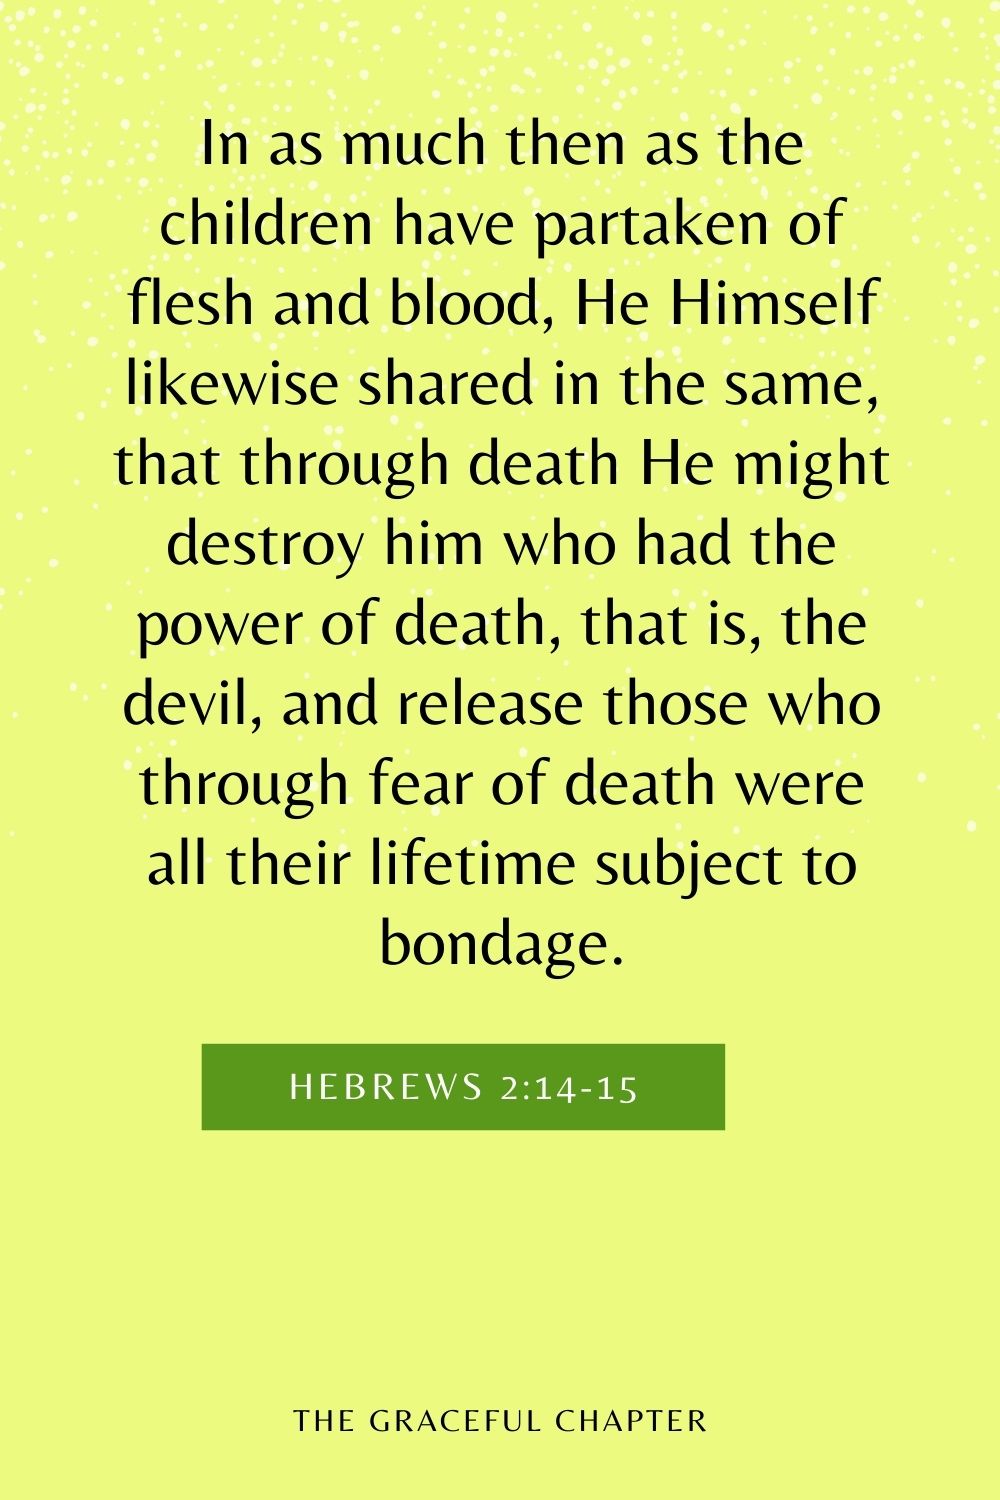 In as much then as the children have partaken of flesh and blood, He Himself likewise shared in the same, that through death He might destroy him who had the power of death, that is, the devil, and release those who through fear of death were all their lifetime subject to bondage. Hebrews 2:14-15